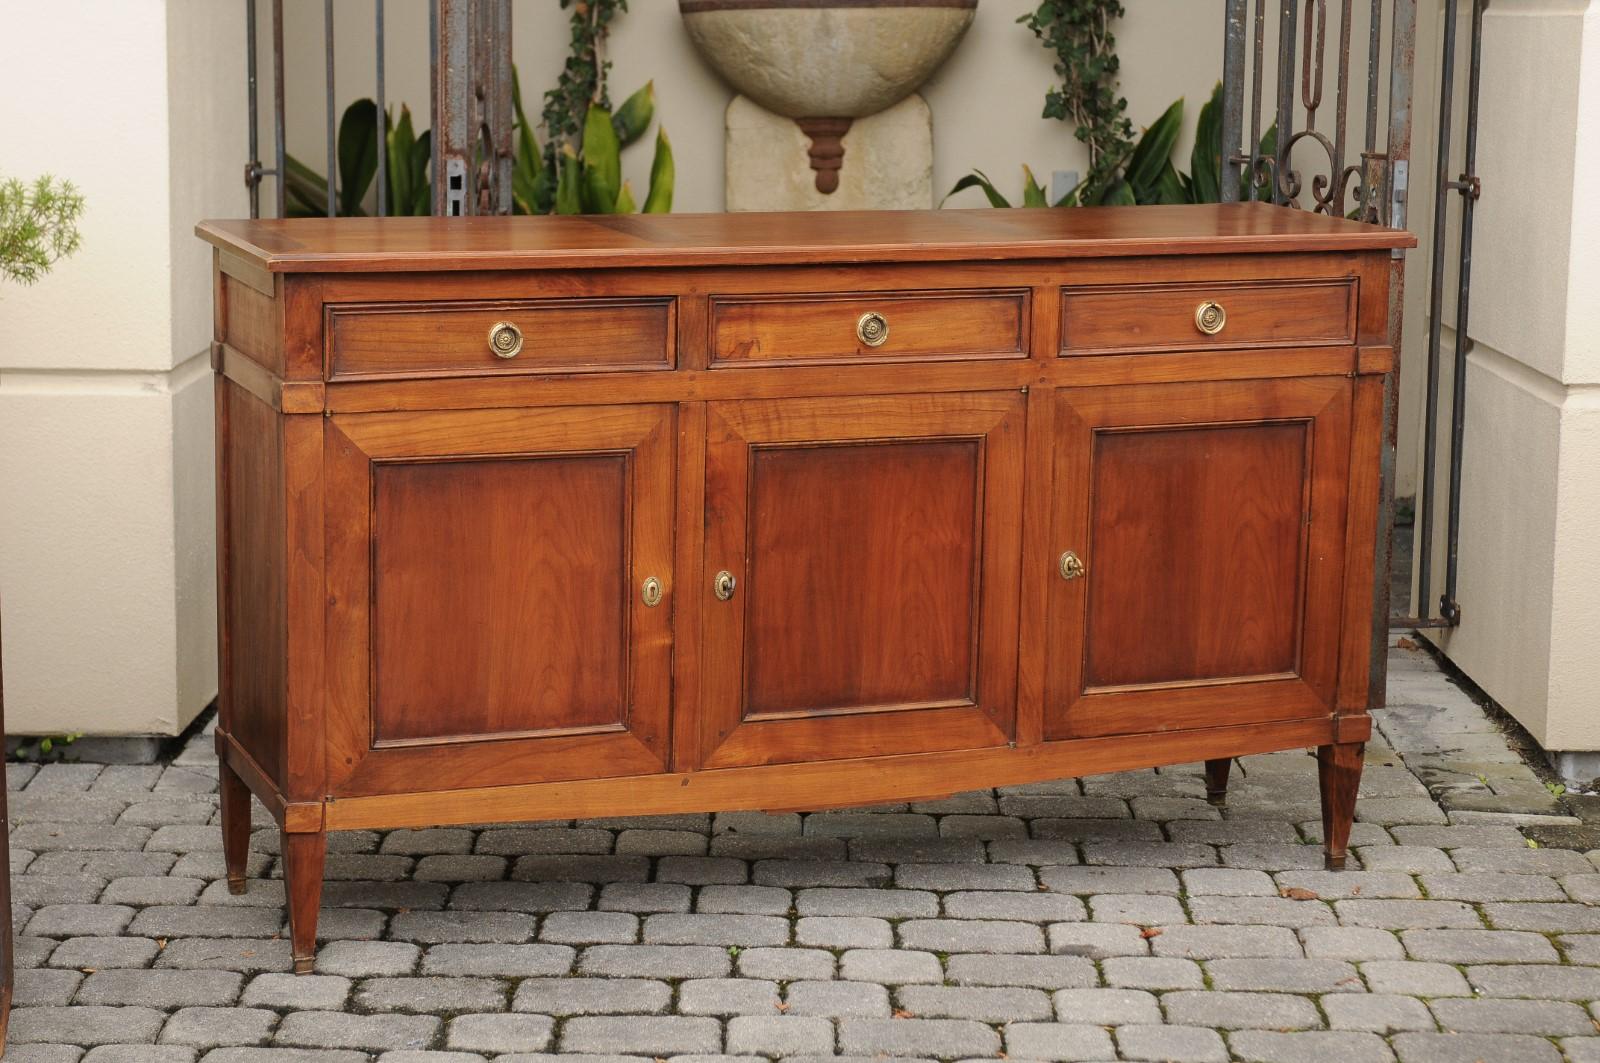 A French walnut three drawers over three doors enfilade from the turn of the century, raised on tapered legs. Born during the turn of the 19th to the 20th century, this French walnut enfilade features a rectangular planked top, sitting above three